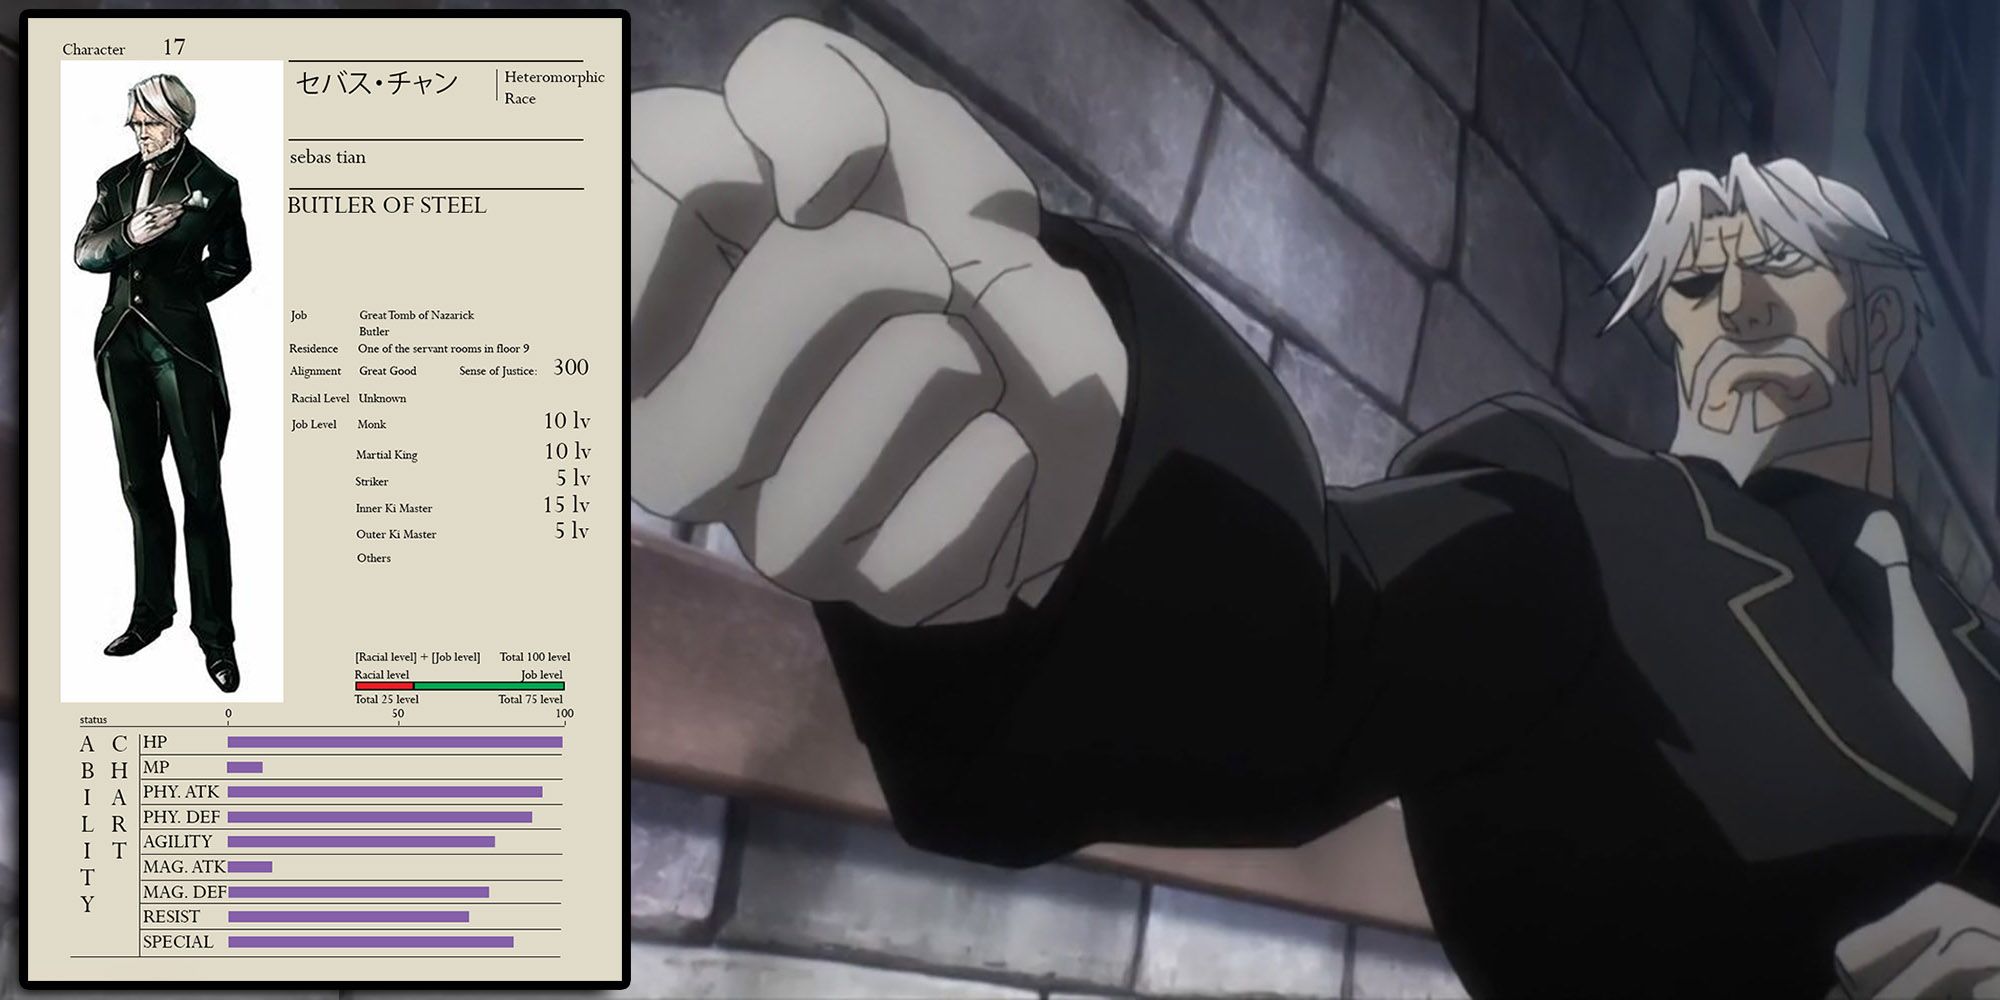 Overlord - Sebas In A Combat Stance With Official Character Sheet Overlaid On Top